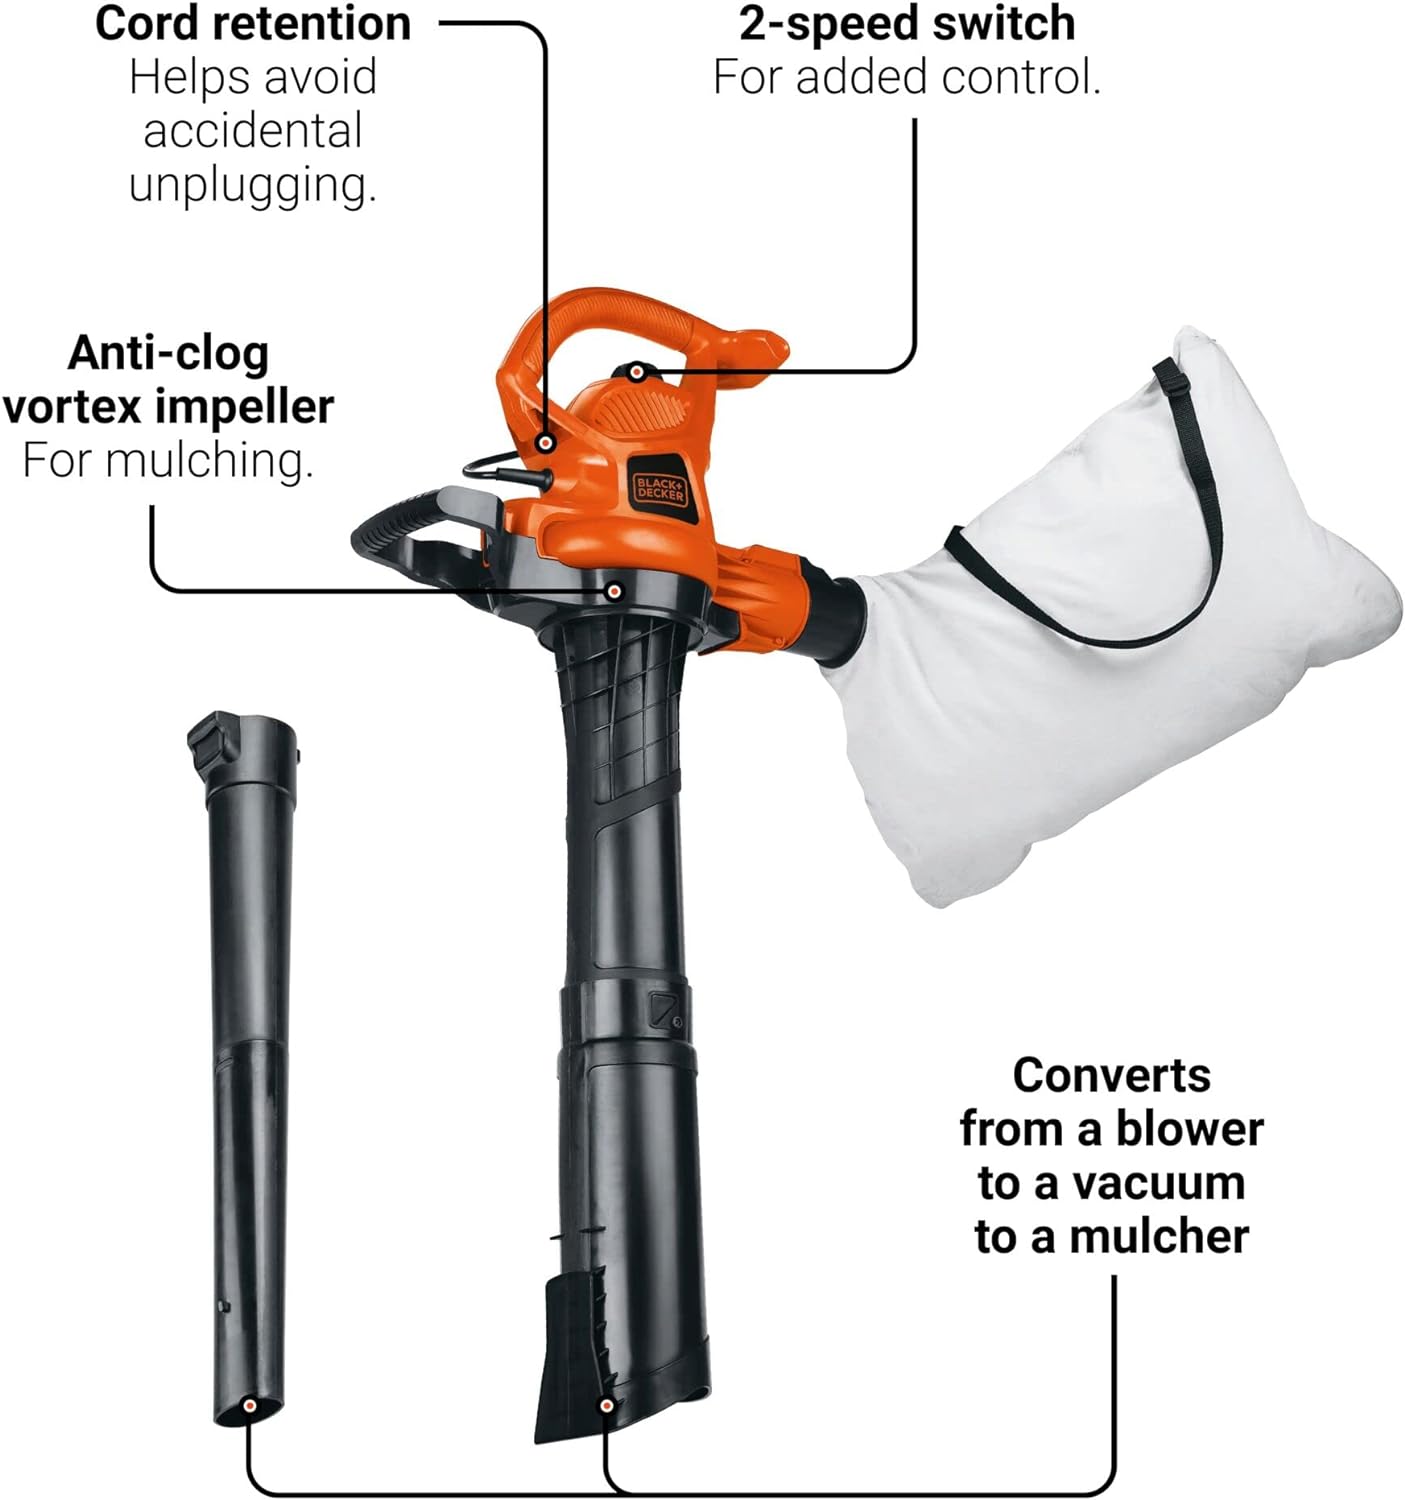 BLACK+DECKER 3-in-1 Leaf Blower, Leaf Vacuum and Mulcher, Up to 230 MPH, 12 Amp, Corded Electric (BV3600)